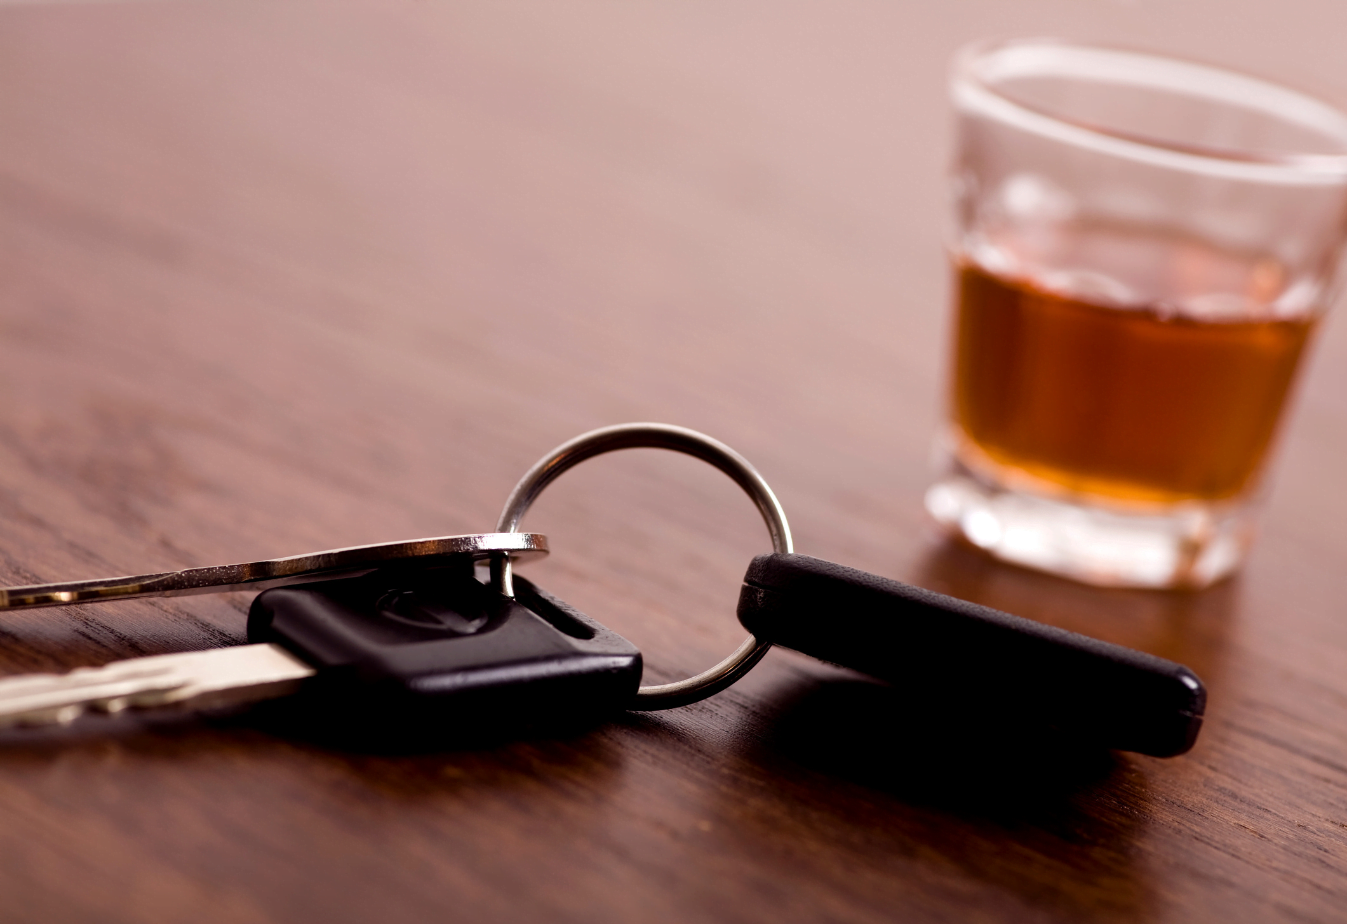 photo of car keys in the foreground and a full shot glass in the background suggesting drunk driving